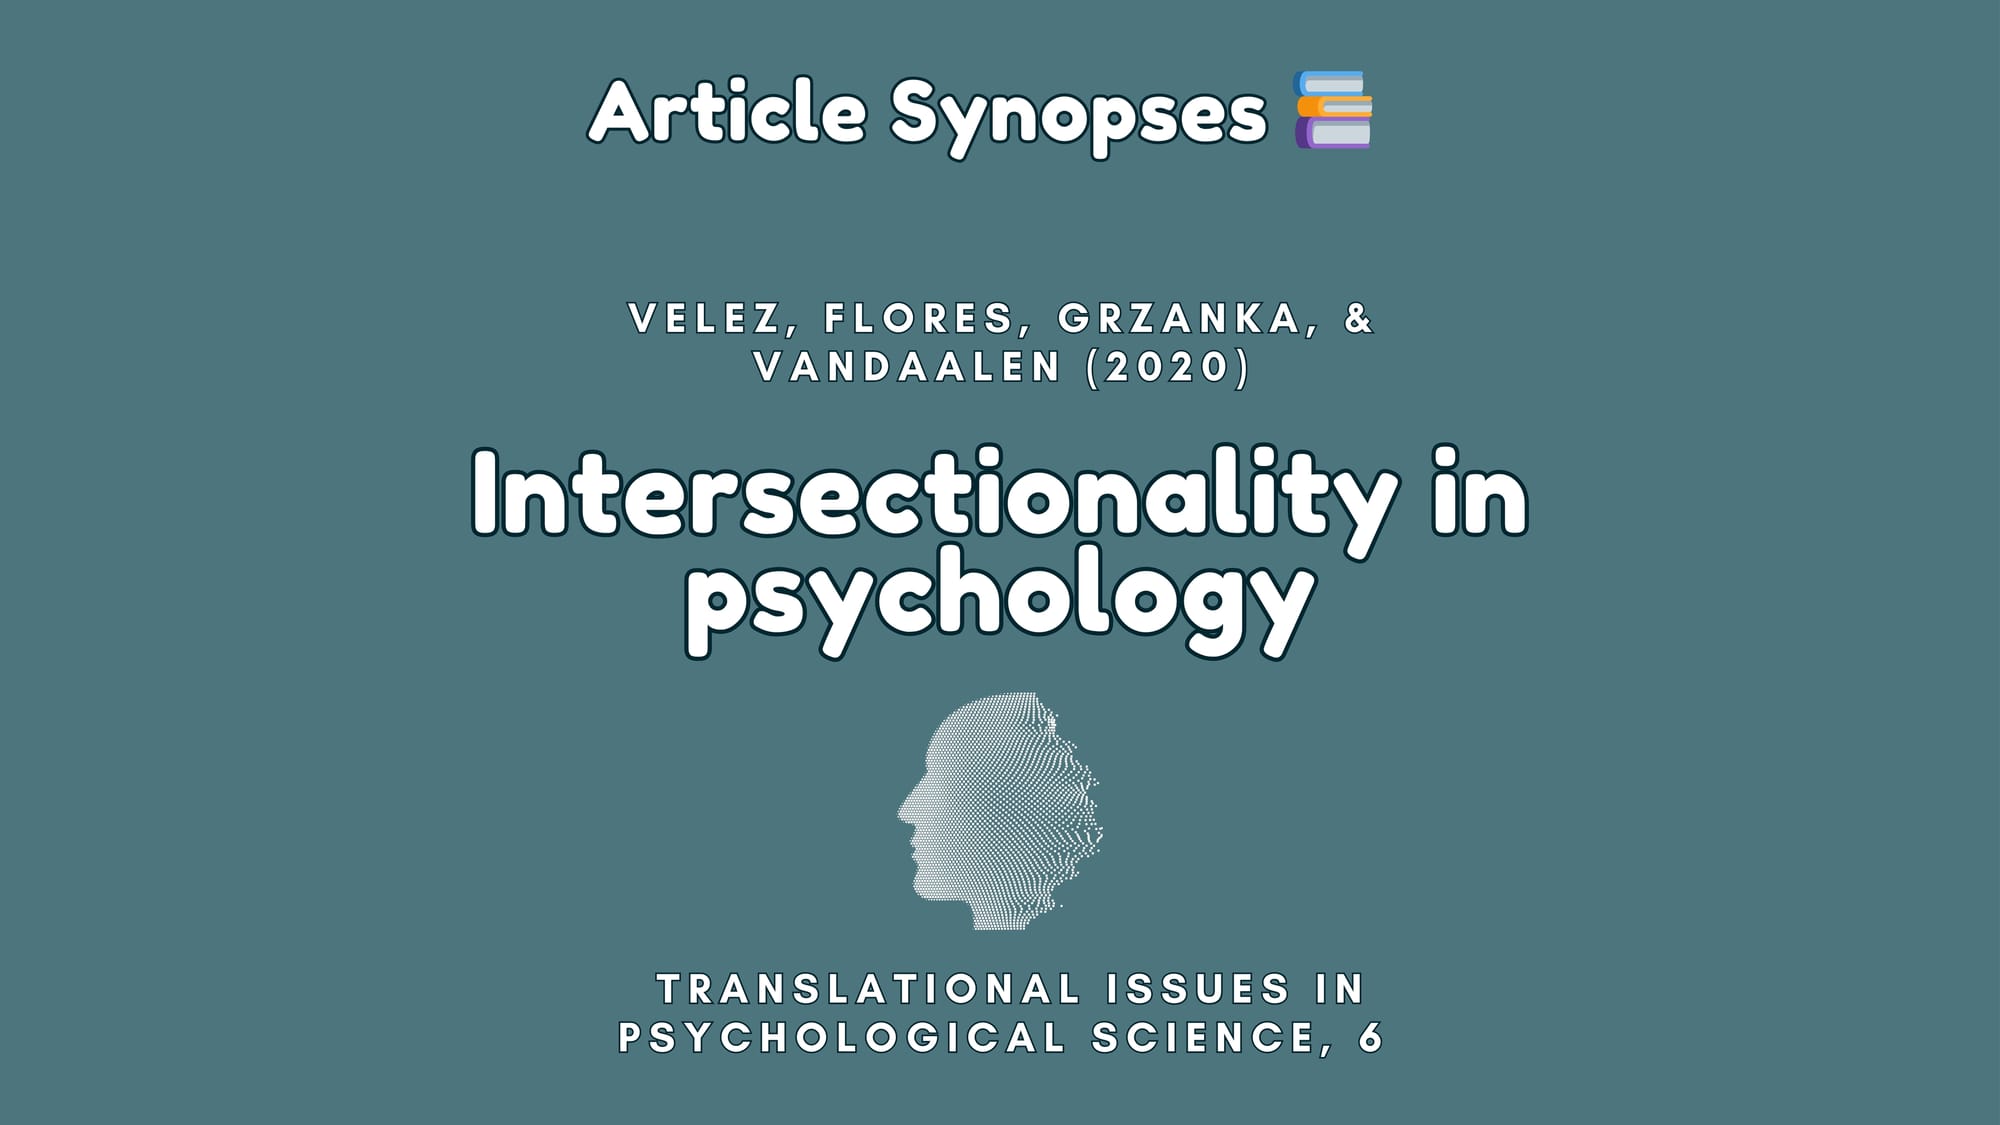 Intersectionality in psychology